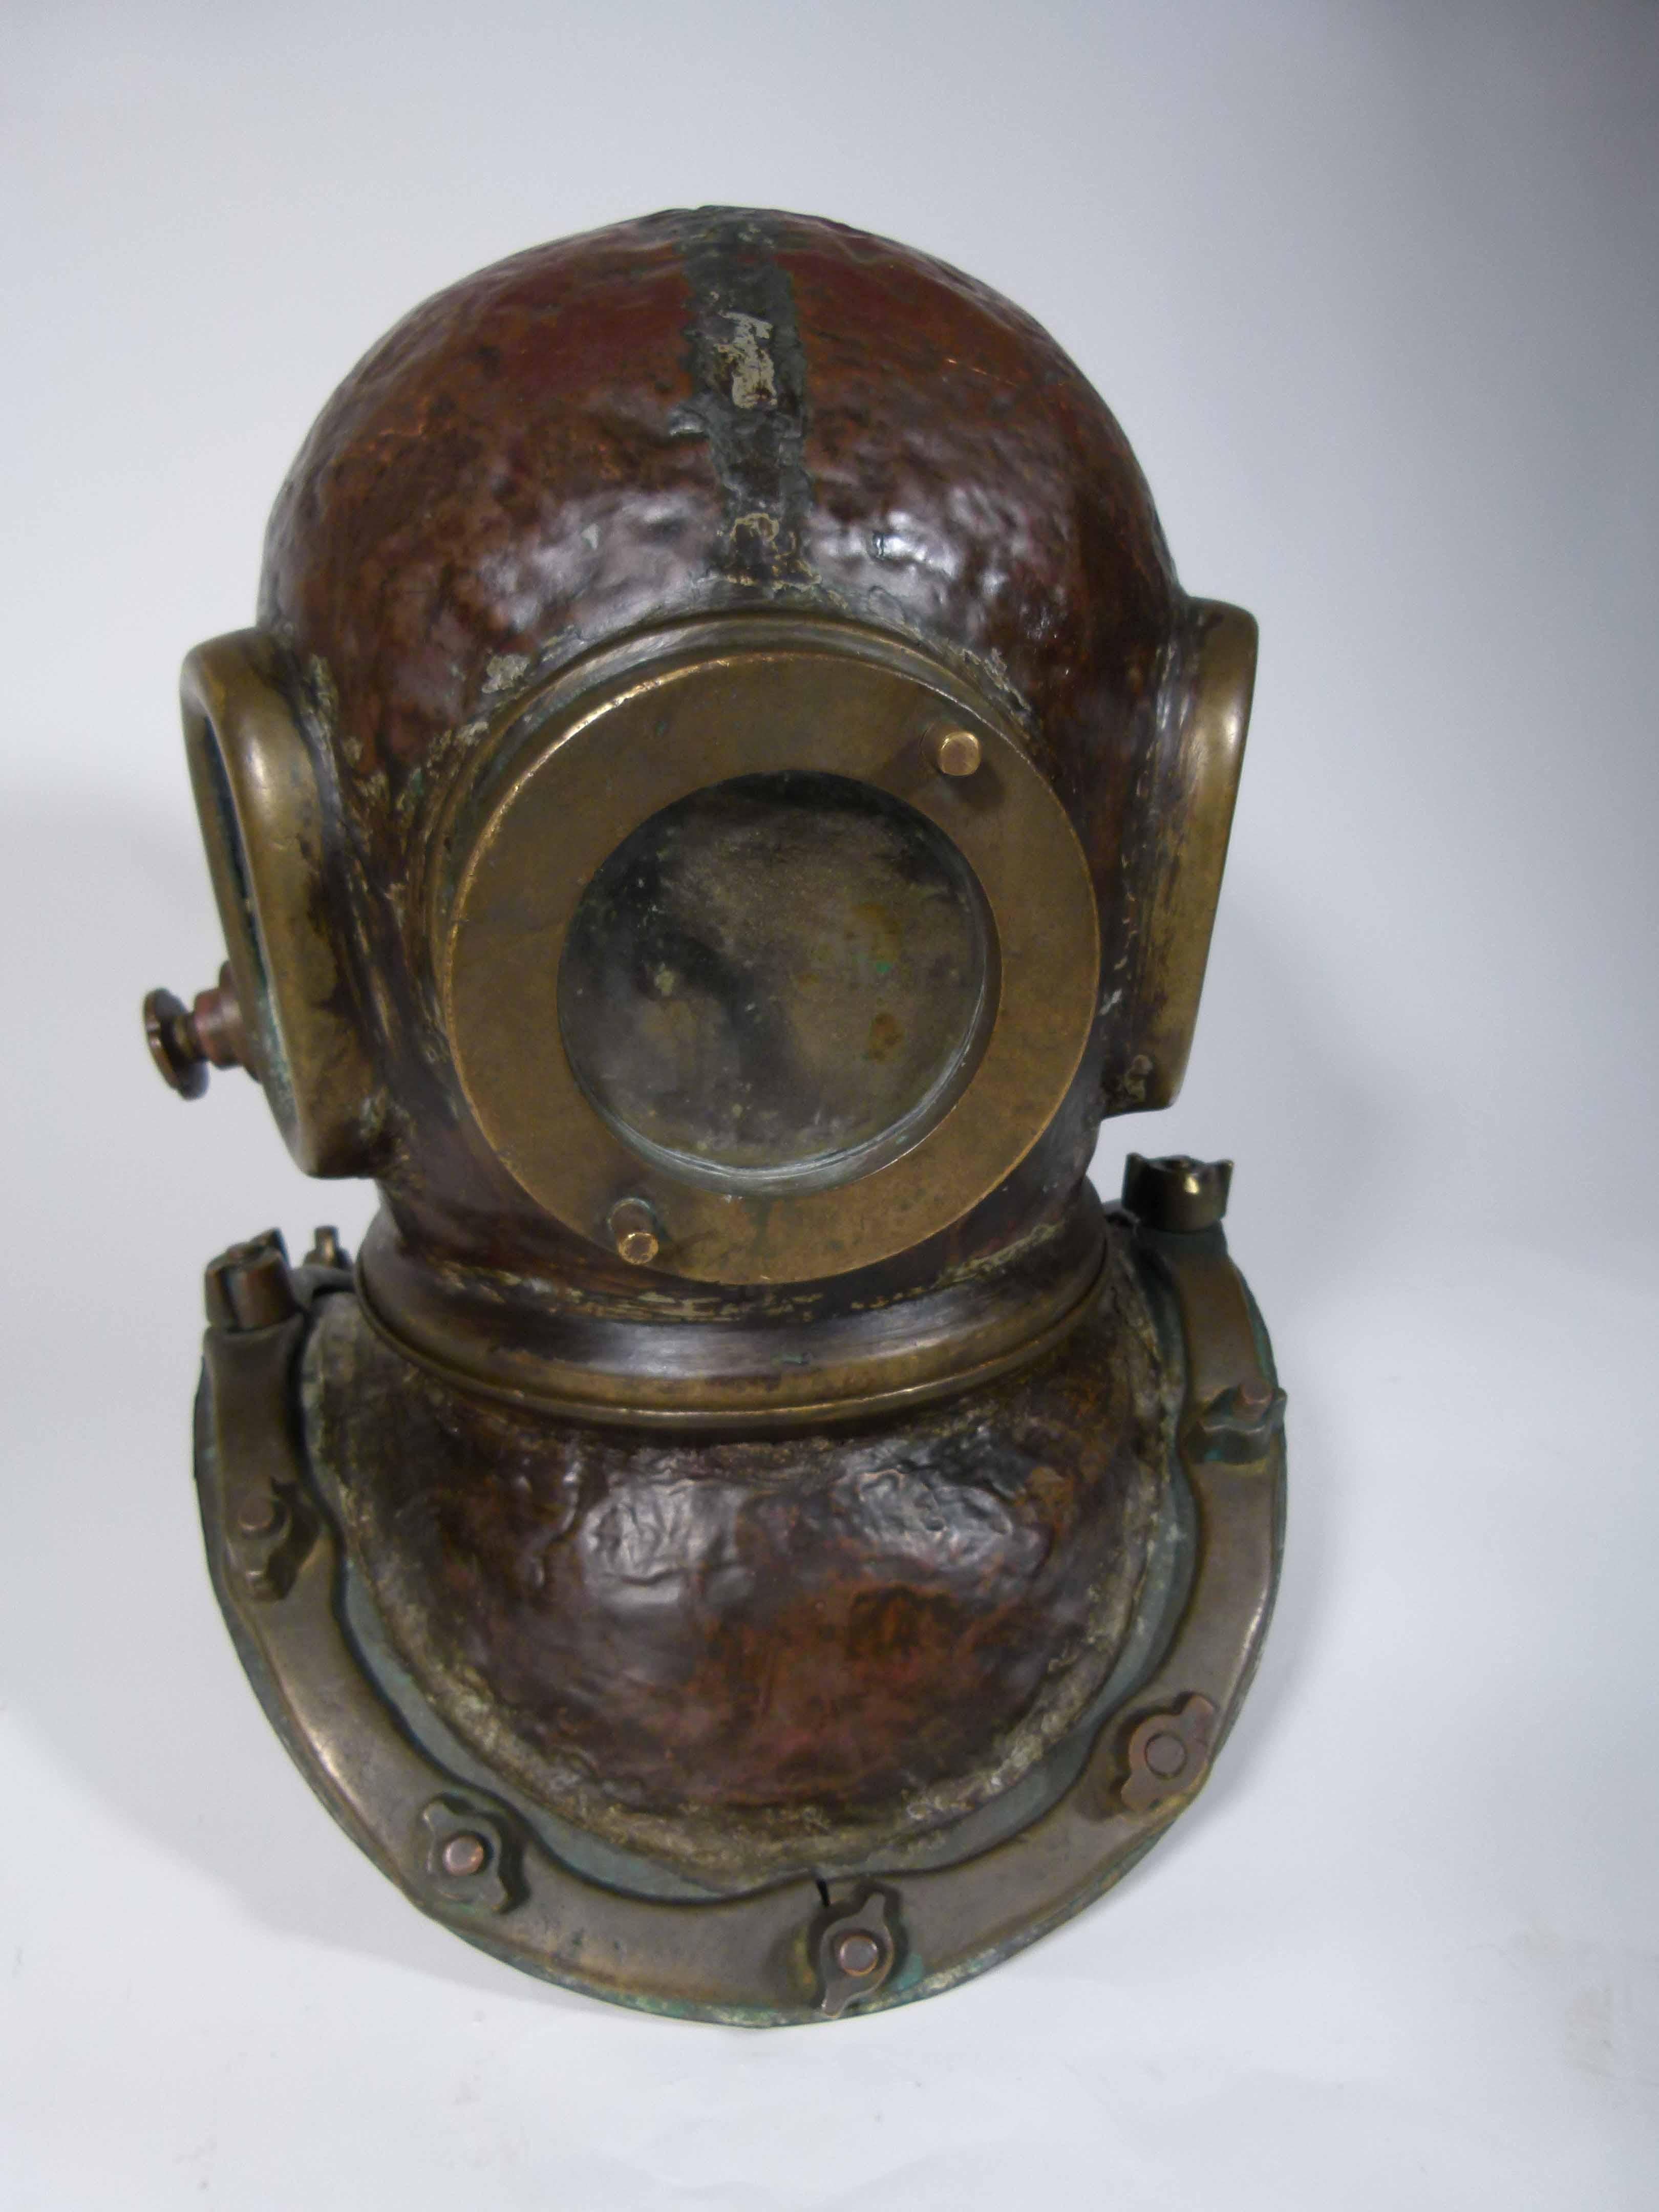 Antique (circa 1920) Chilean diving helmet with all glass intact in all 3 ports. Perfect to add to your nautical collection.